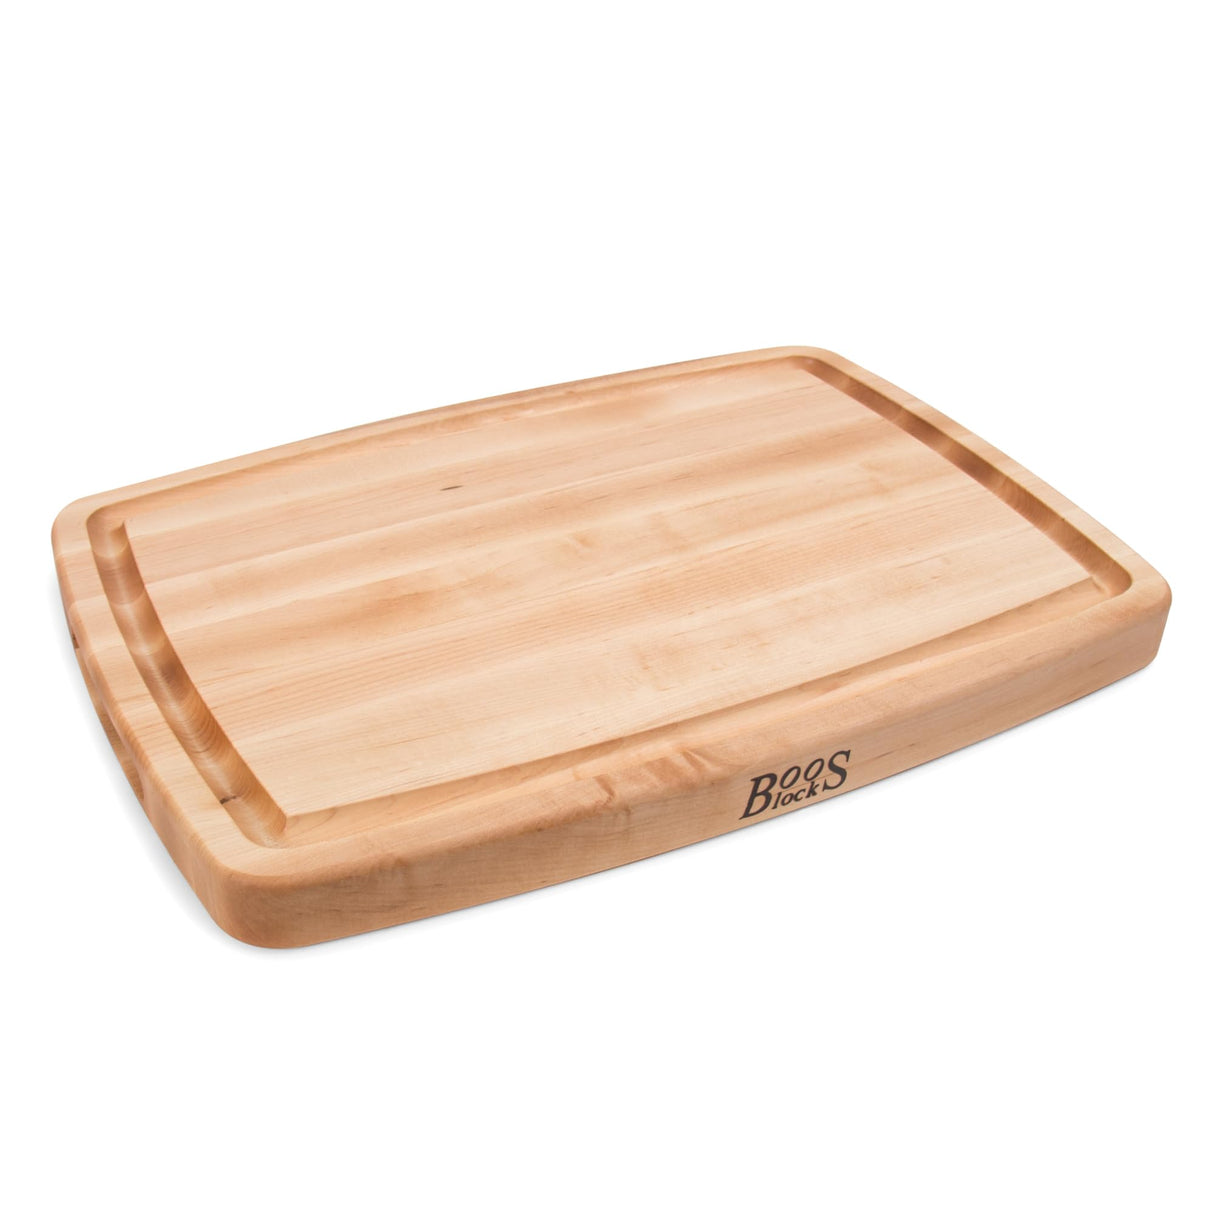 John Boos CB1050-1M2014150 Maple Wood Cutting Board for Kitchen Prep 20 x 14 Inches, 1.5 Inch Thick Edge Grain Reversible Oval Charcuterie Block with Juice Groove 20X14X1.5 MPL-EDGE GR-